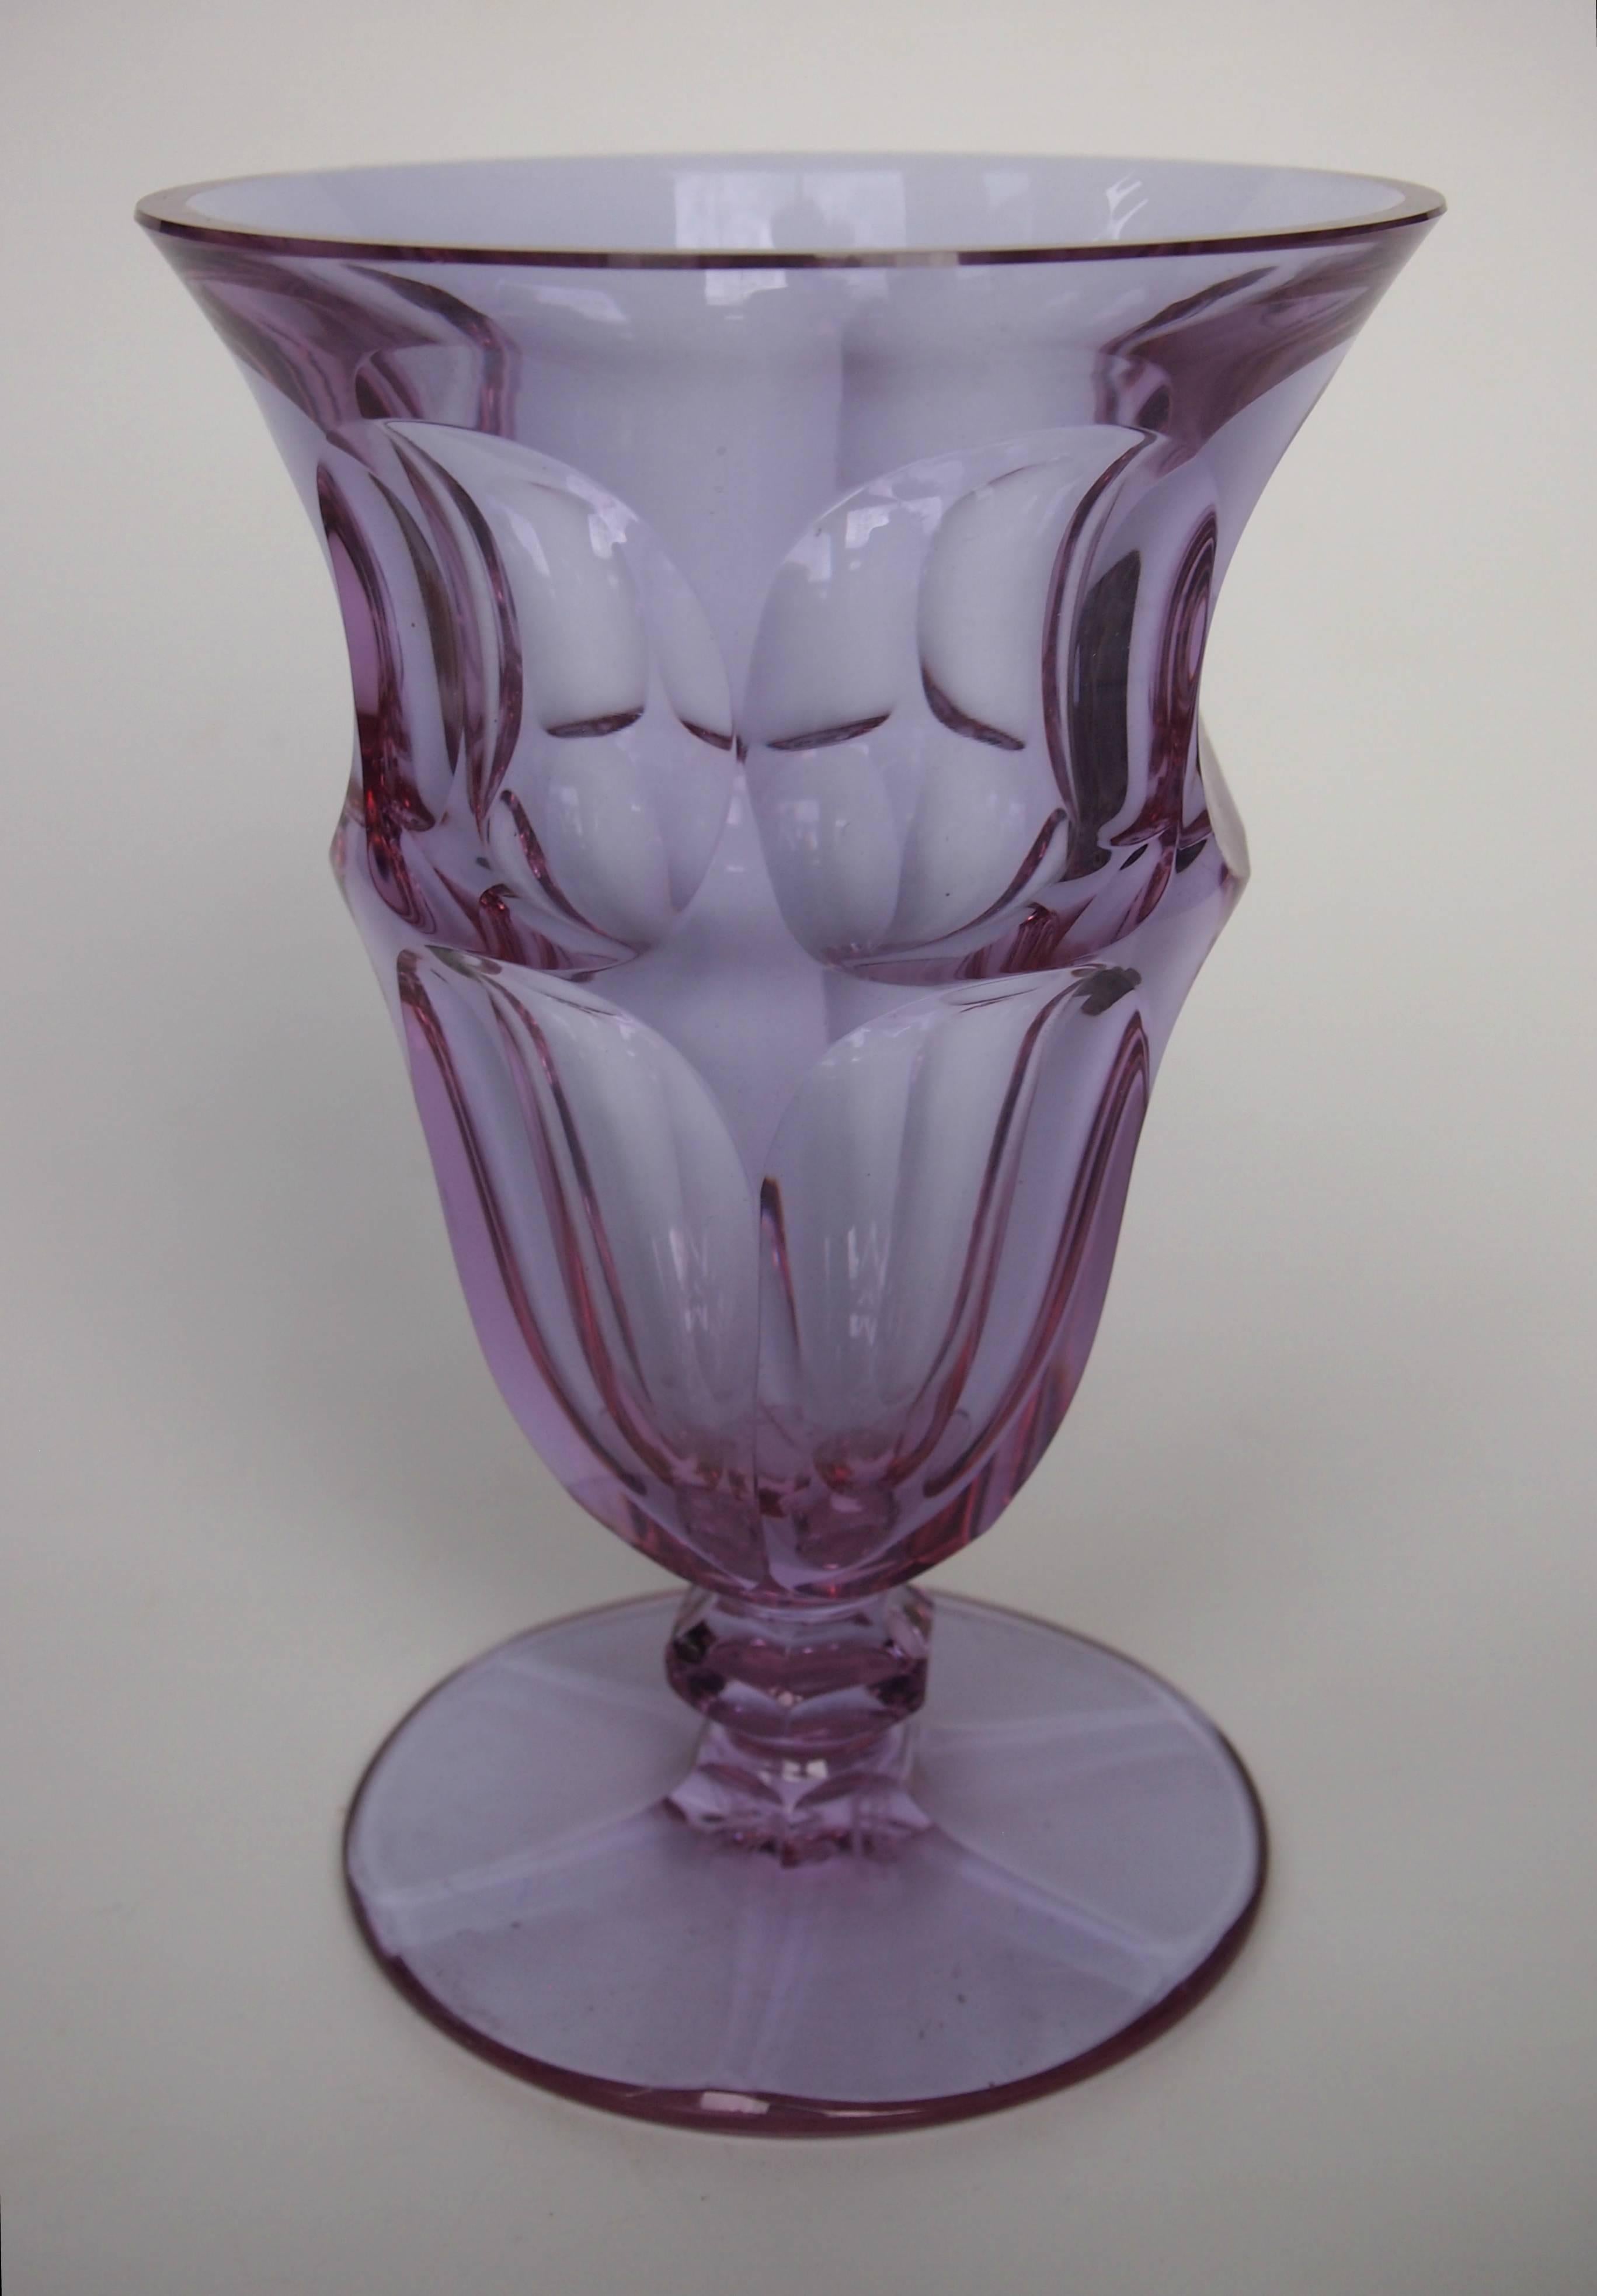 Moser hand-cut Art Deco vase in the unusual colour 'Alexandrit' designed by Heinrich Hussmann, circa 1929. Signed 'Alexandrit' Moser Karlsbad. 'Alexandrit' has the ability to change color dramatically depending on the frequency of the light in the